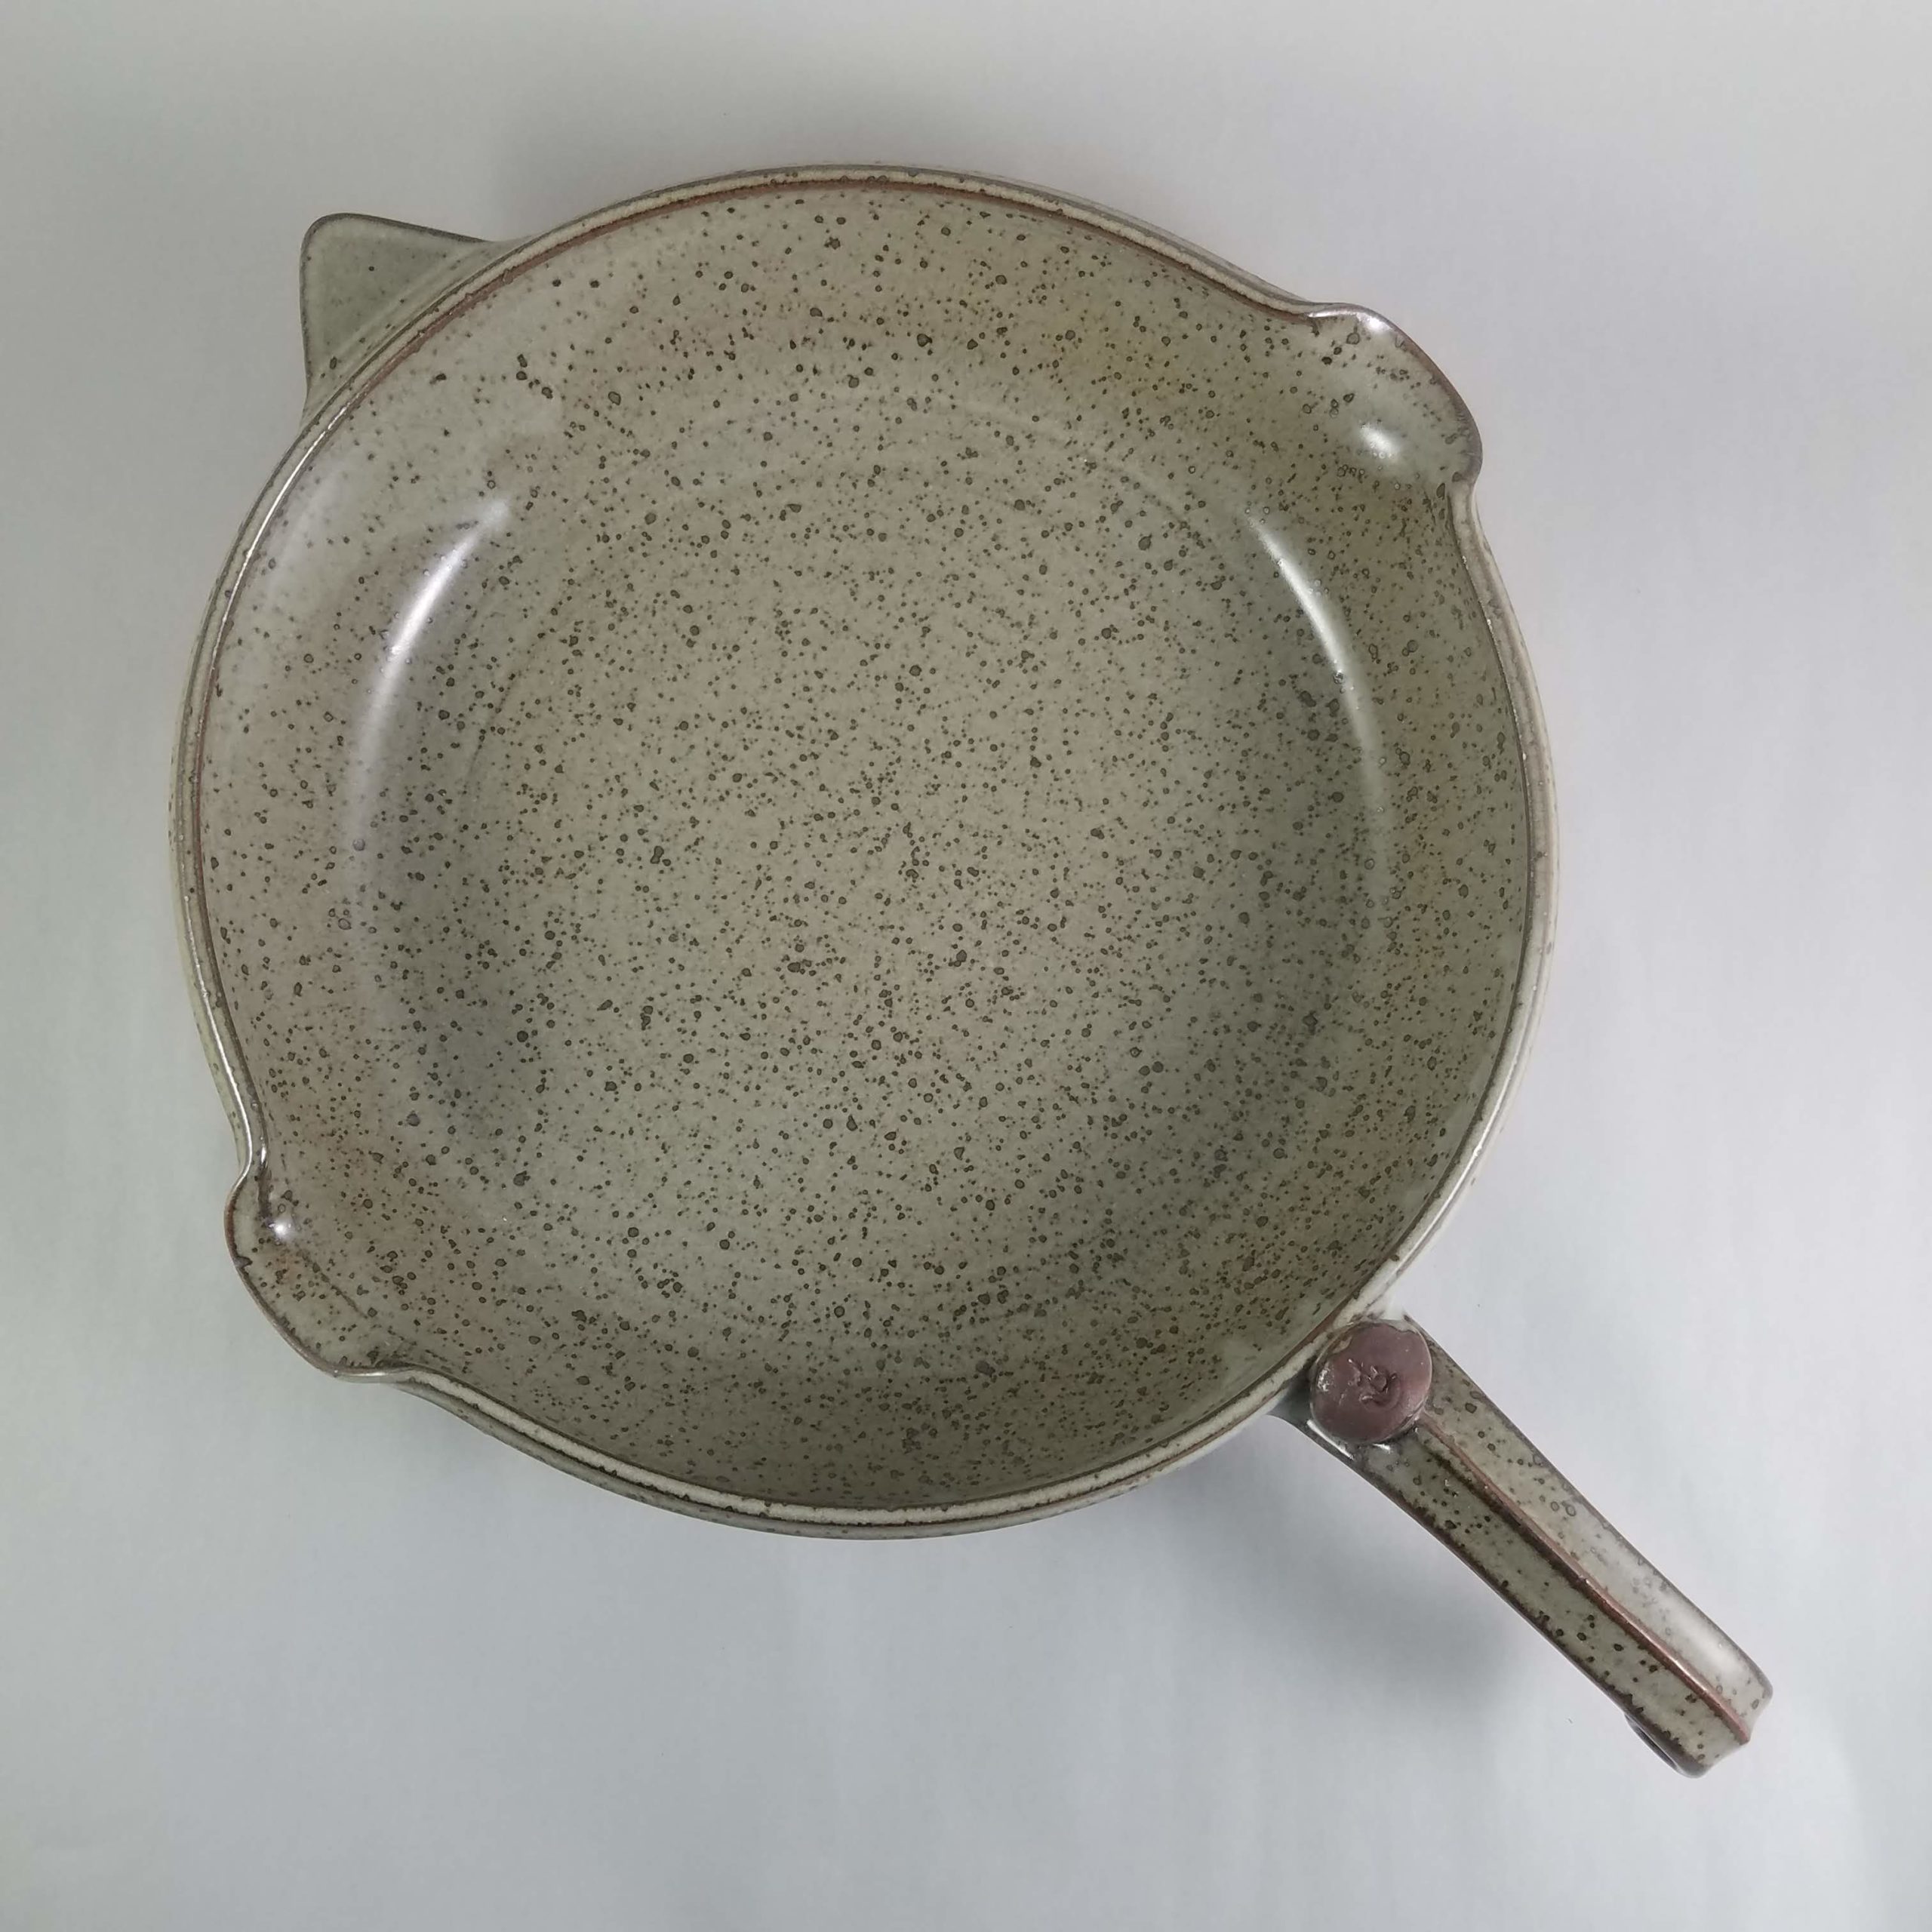 Clay Coyote Flameware Large Skillet